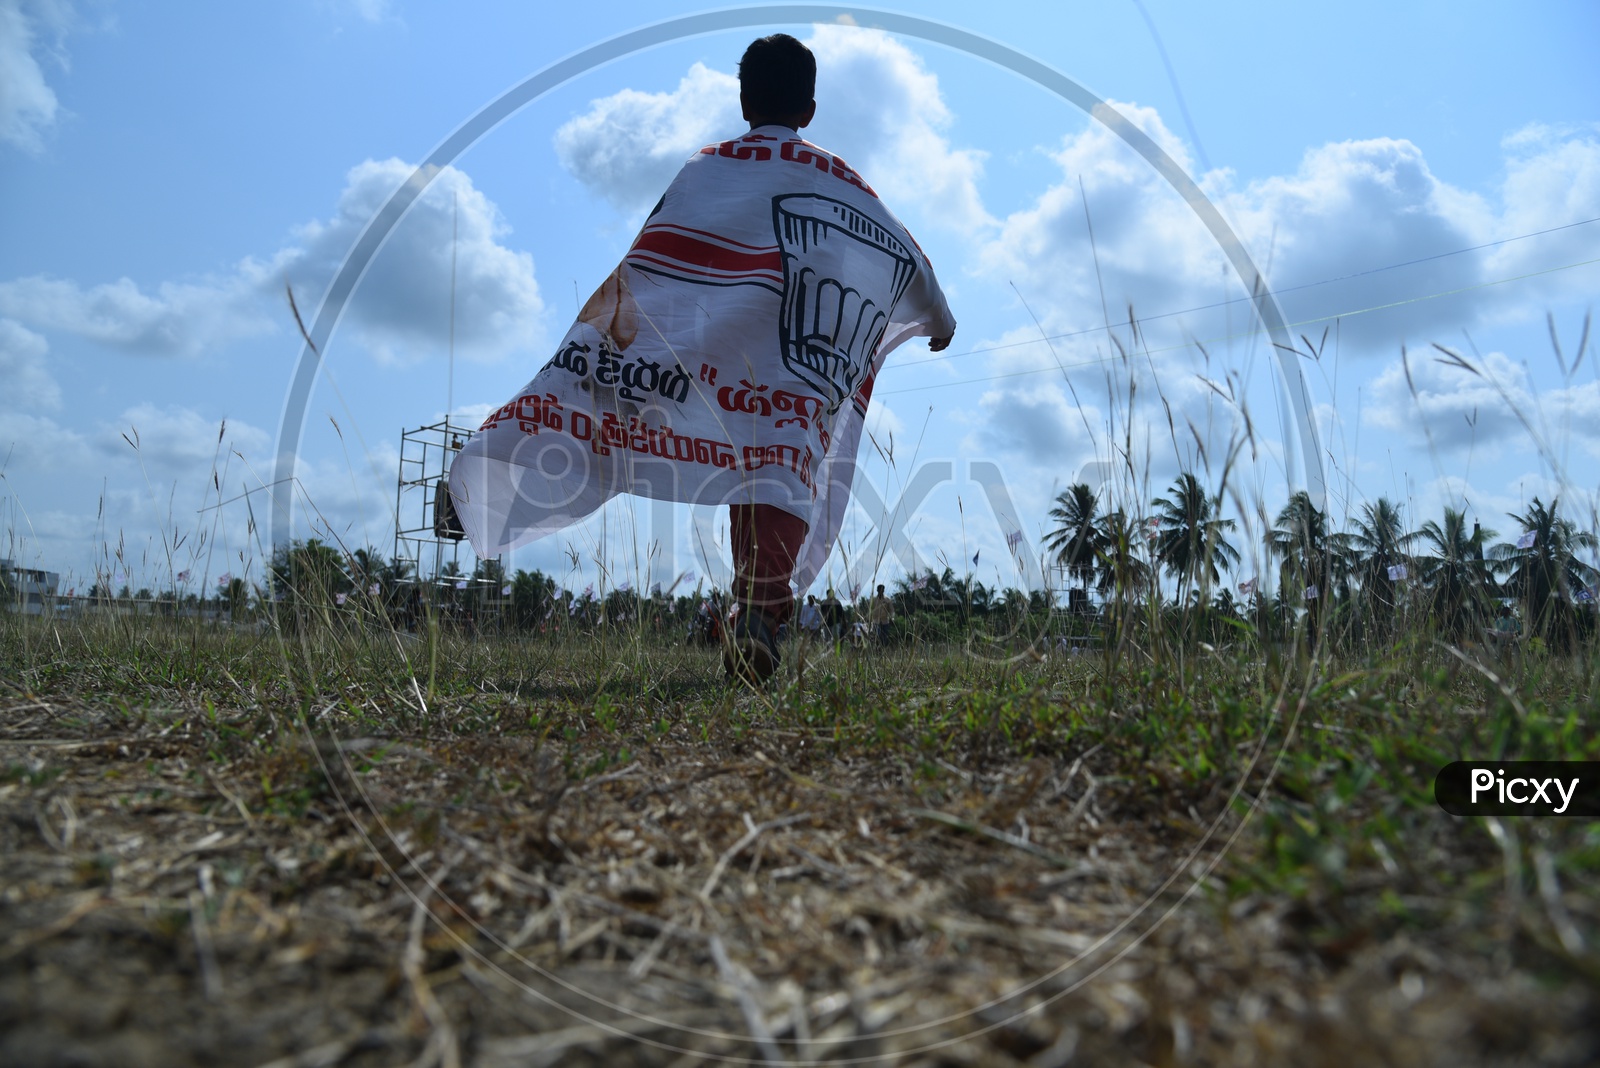 Jana sena party supporter holding party banner